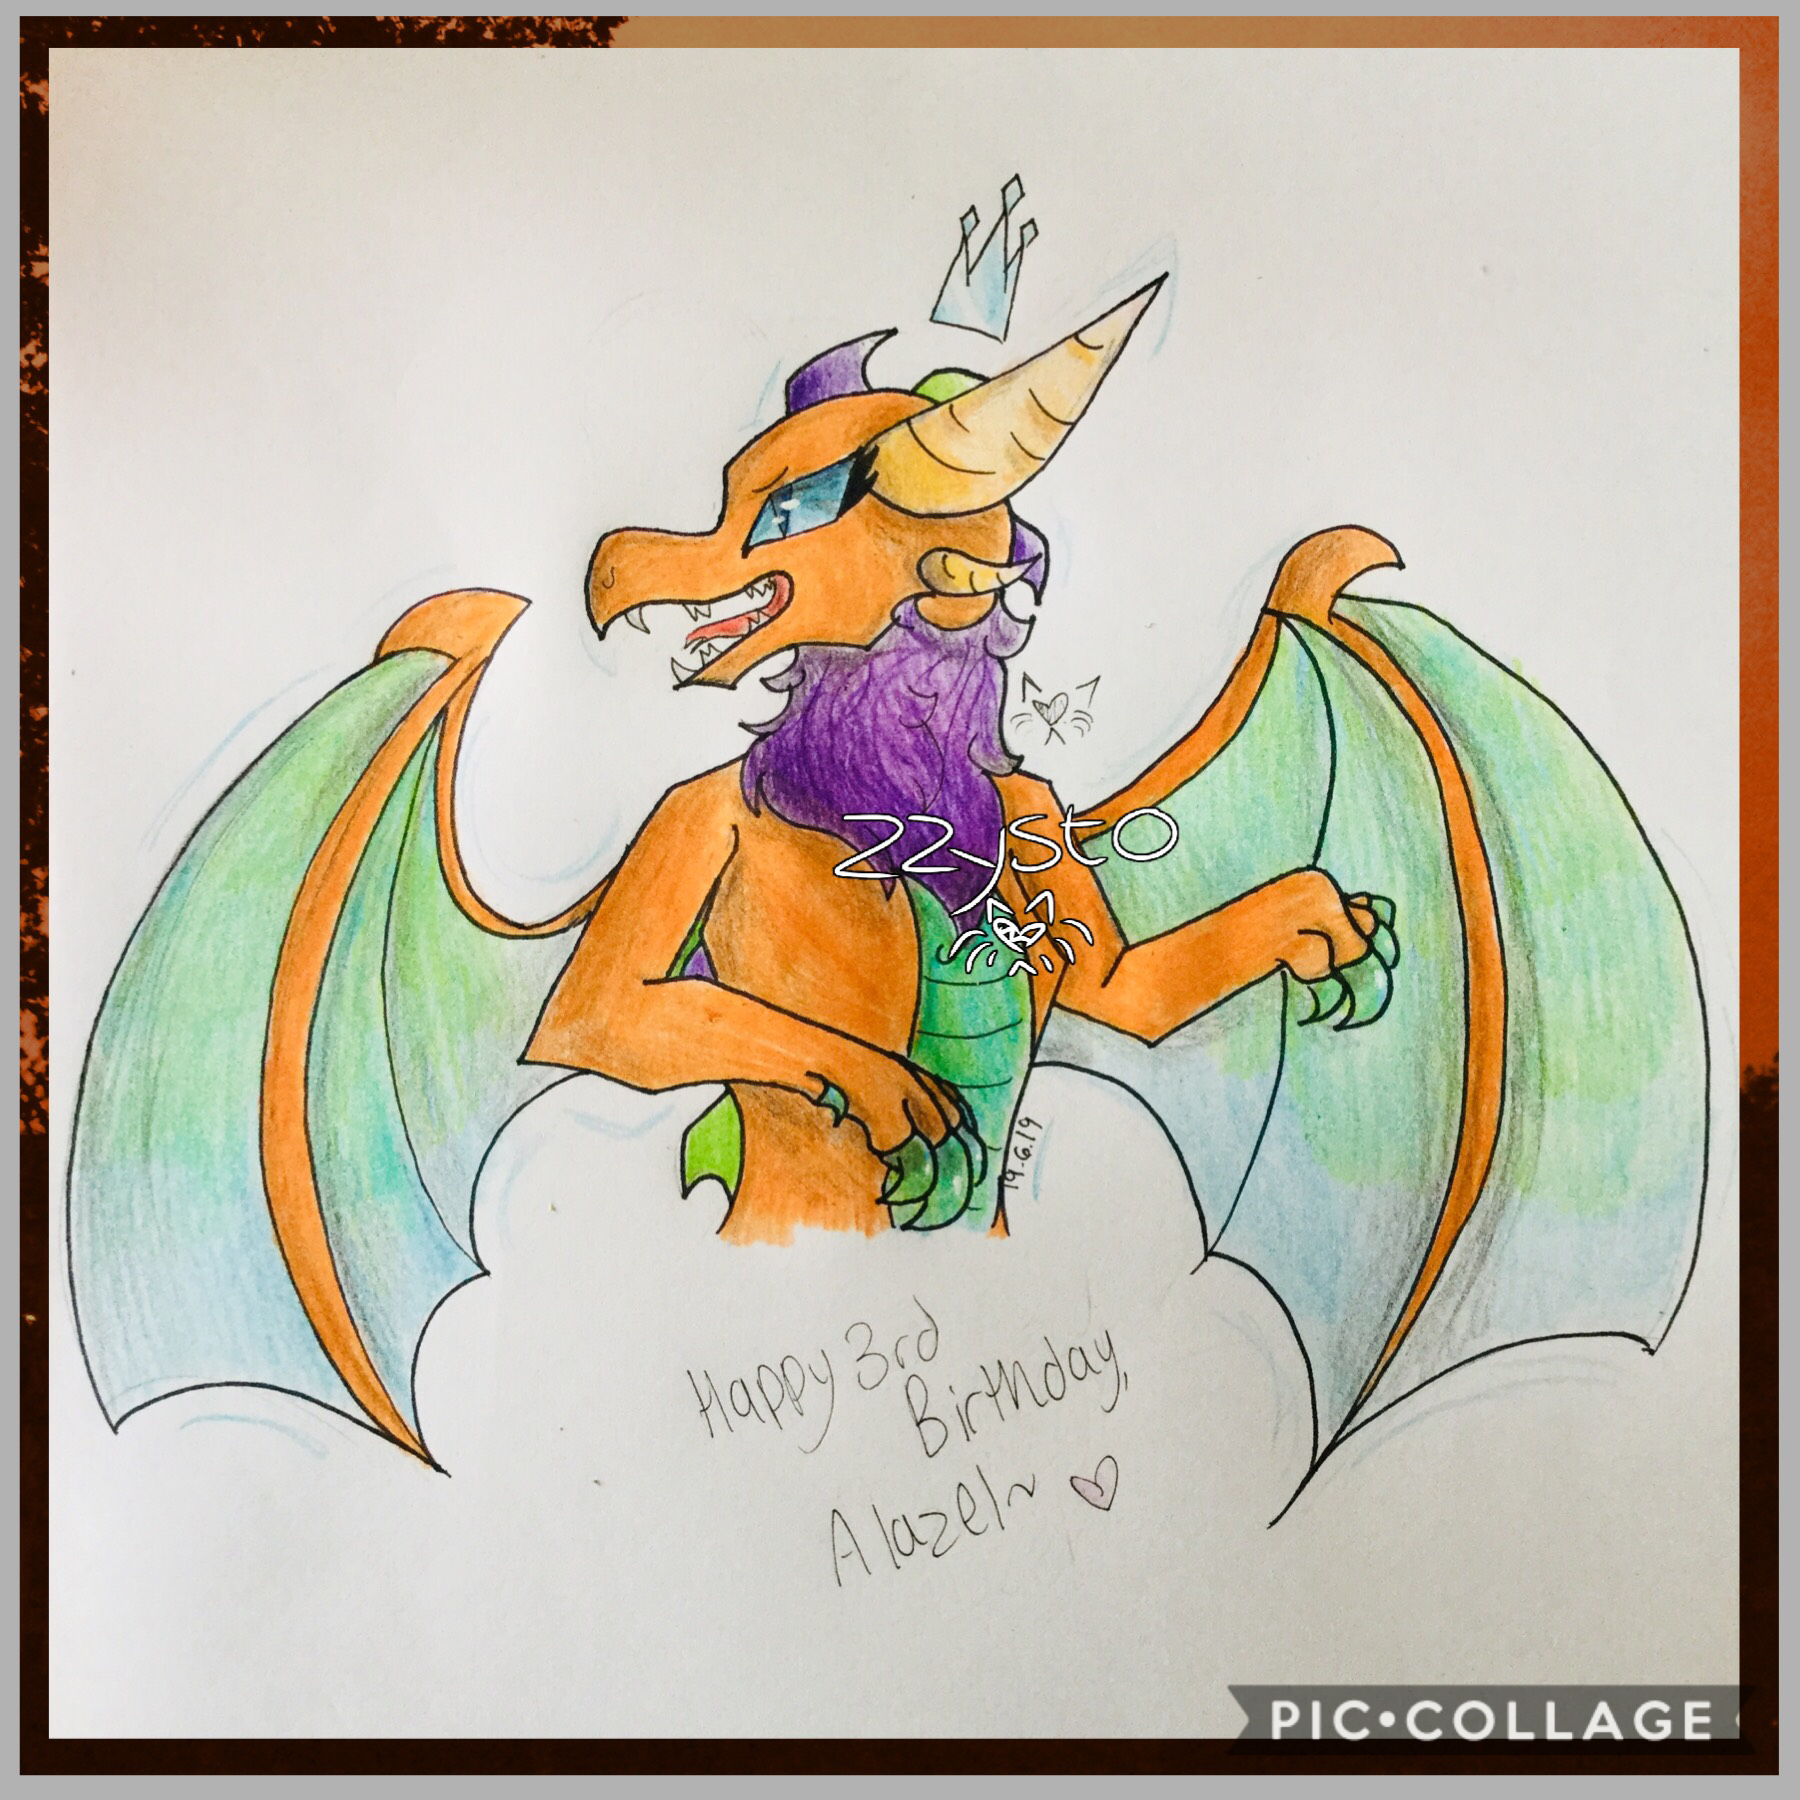 🐉Tap🐉
mann exams are hard,,
I might not be liking things and interacting with you guys much but I’m still here qwq 
Anyway, here’s a gift for Alazel as it was her fursona’s 3rd birthday yesterday uwu I was limited by colours, so sorry about that-